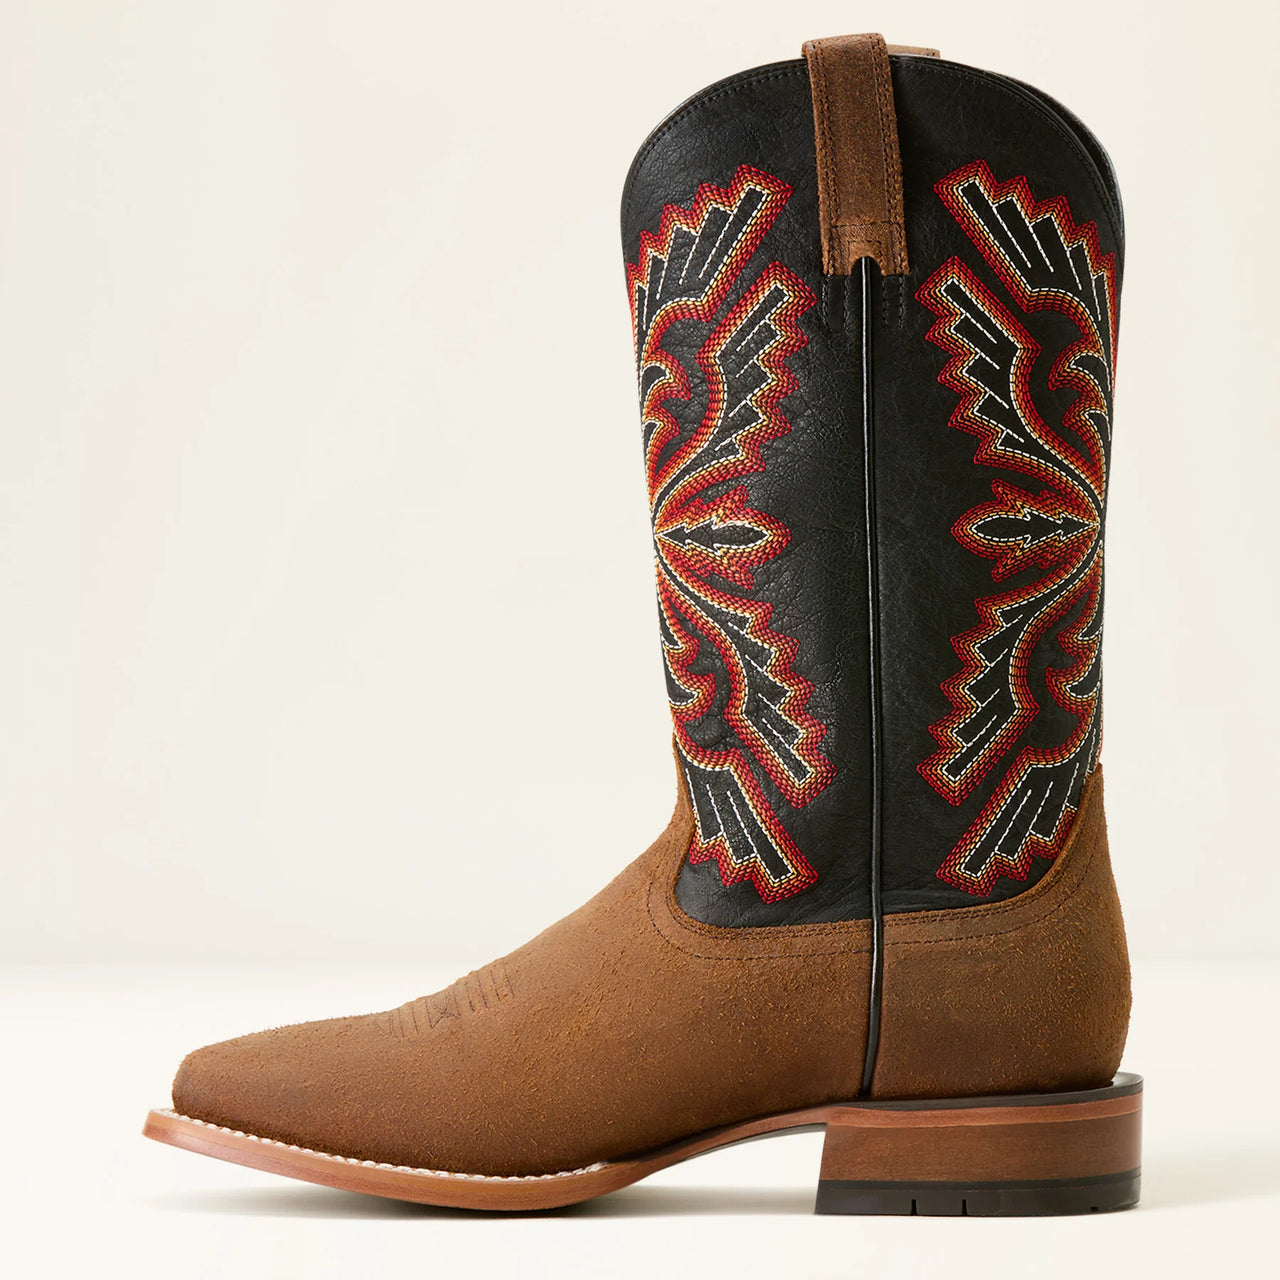 Ariat Men's Sting Cowboy Boot - Weathered Wicker and Black Bayou